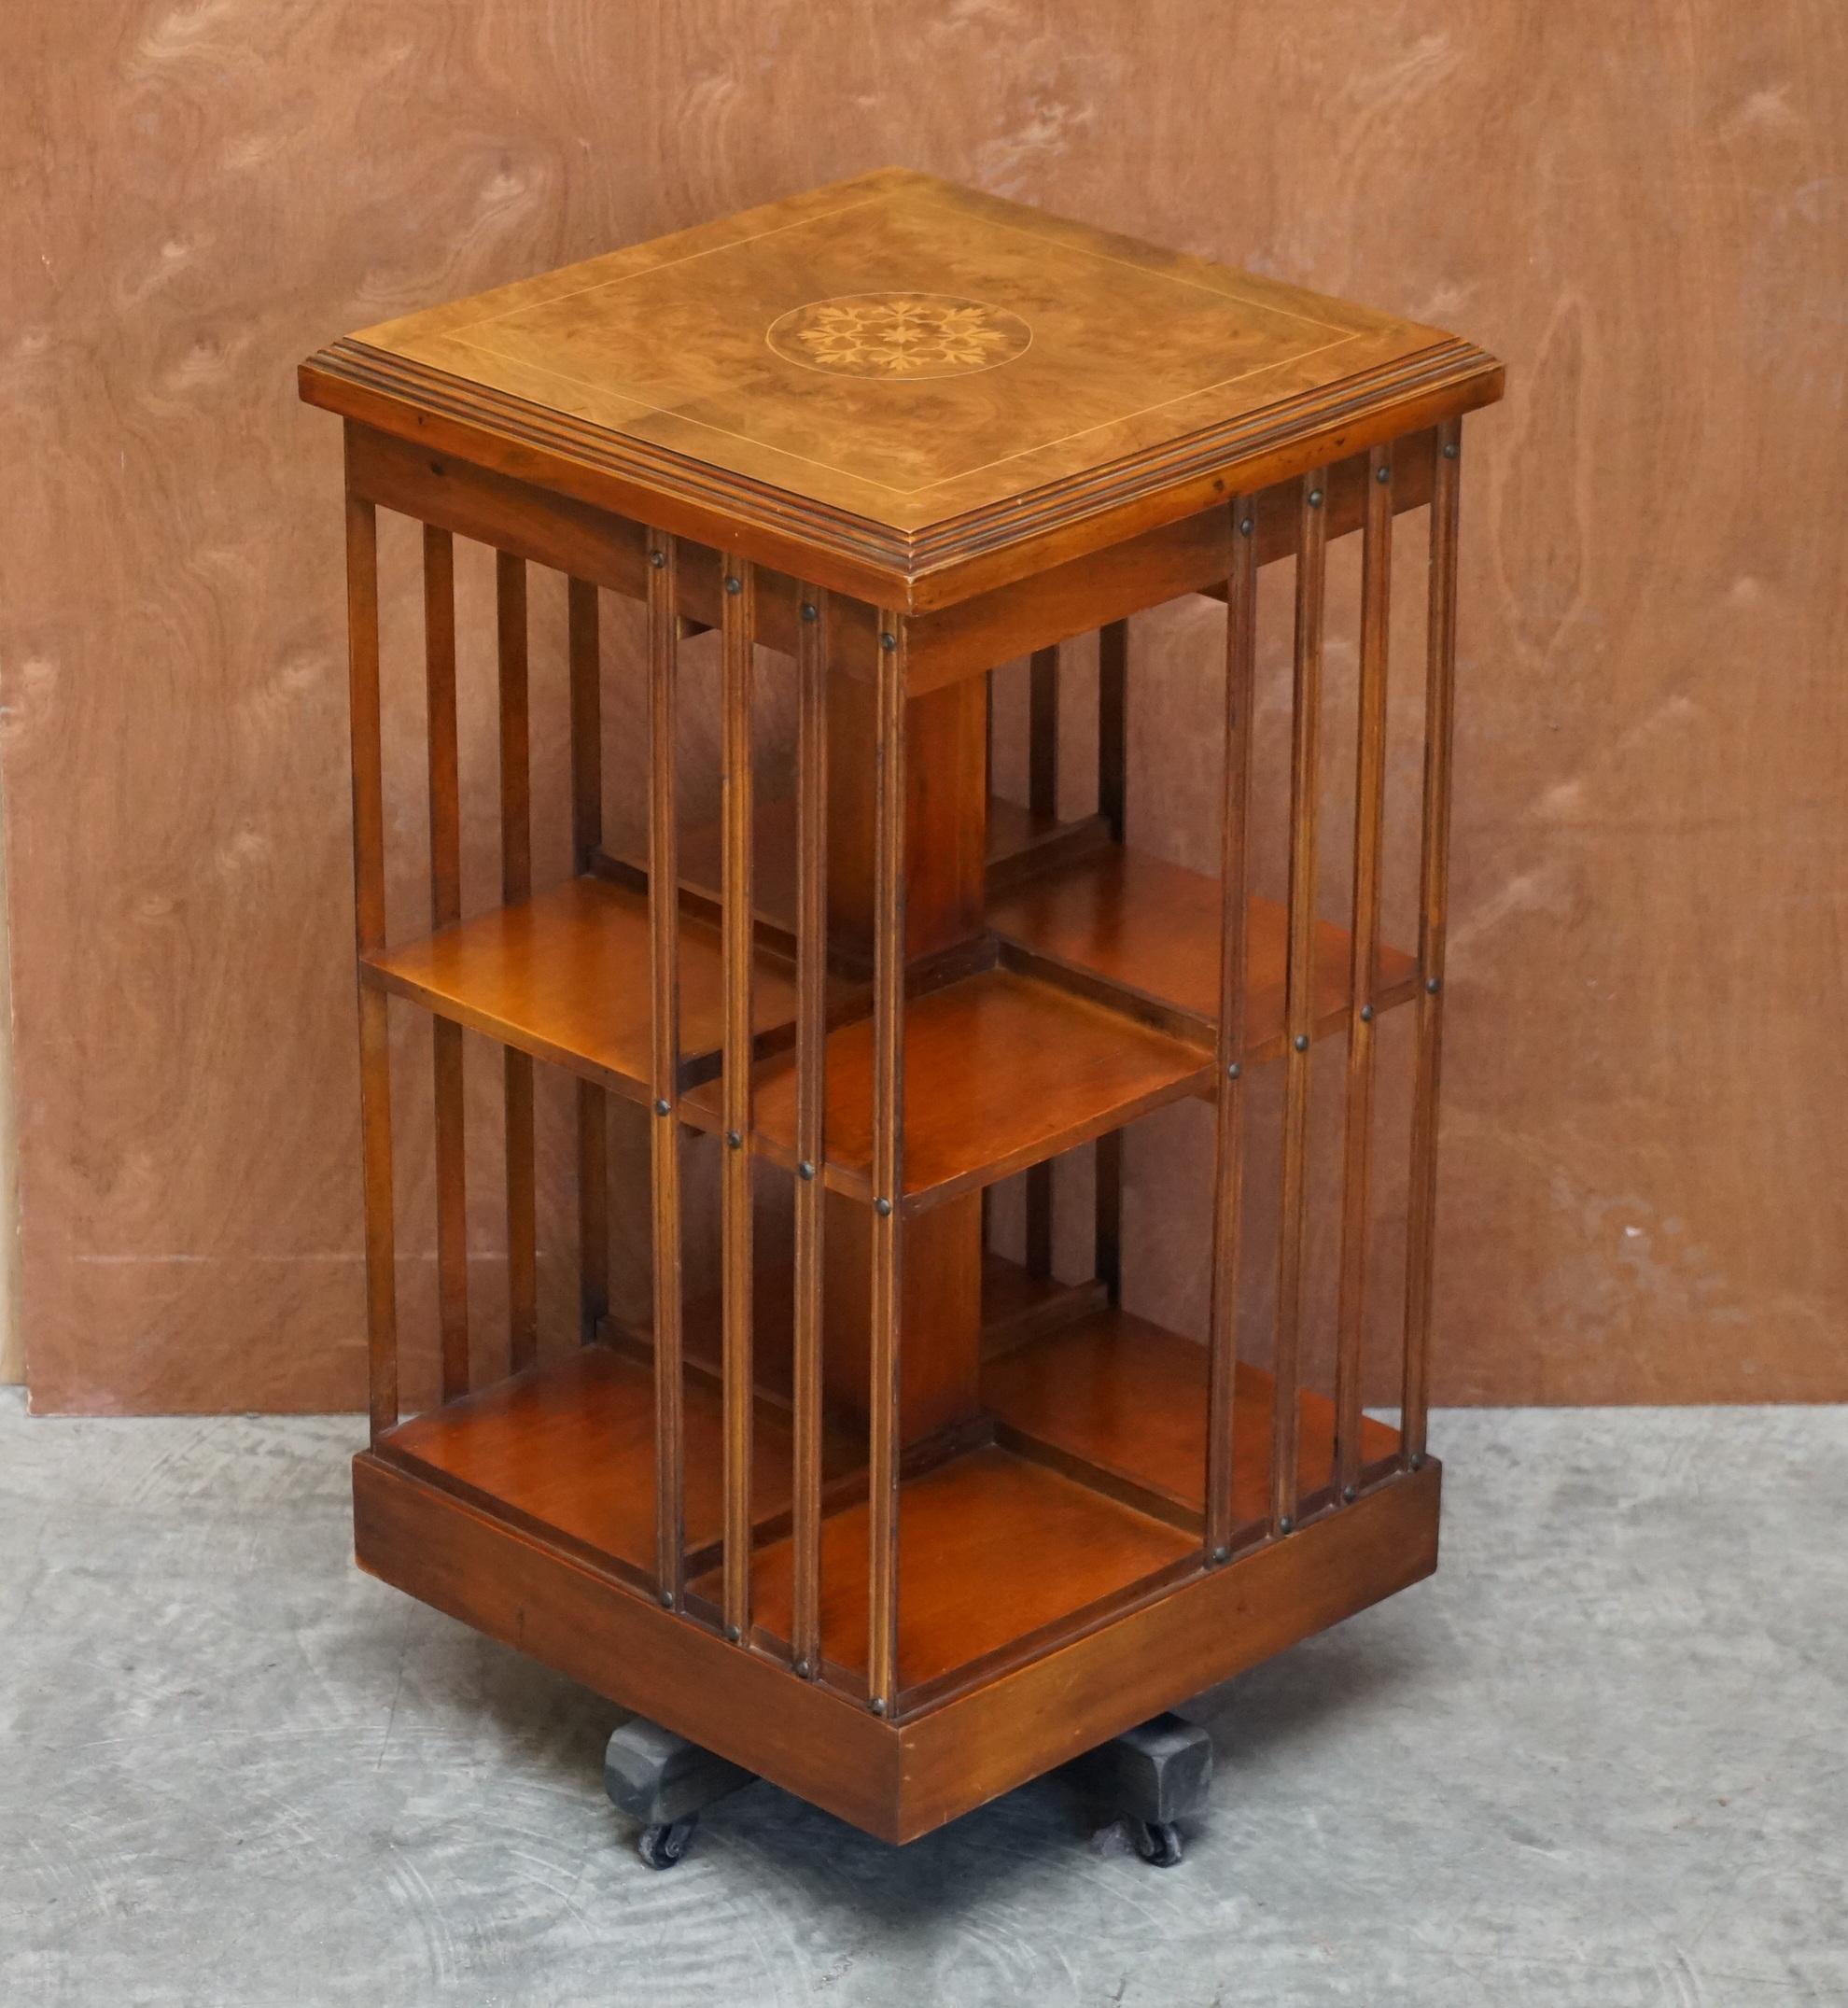 We are delighted to offer for sale this stunning vintage Sheraton revival burr elm & satinwood revolving bookcase table

A very good looking well made and decorative piece. Made in the Sheraton revival style with wonderful inlay and extremely